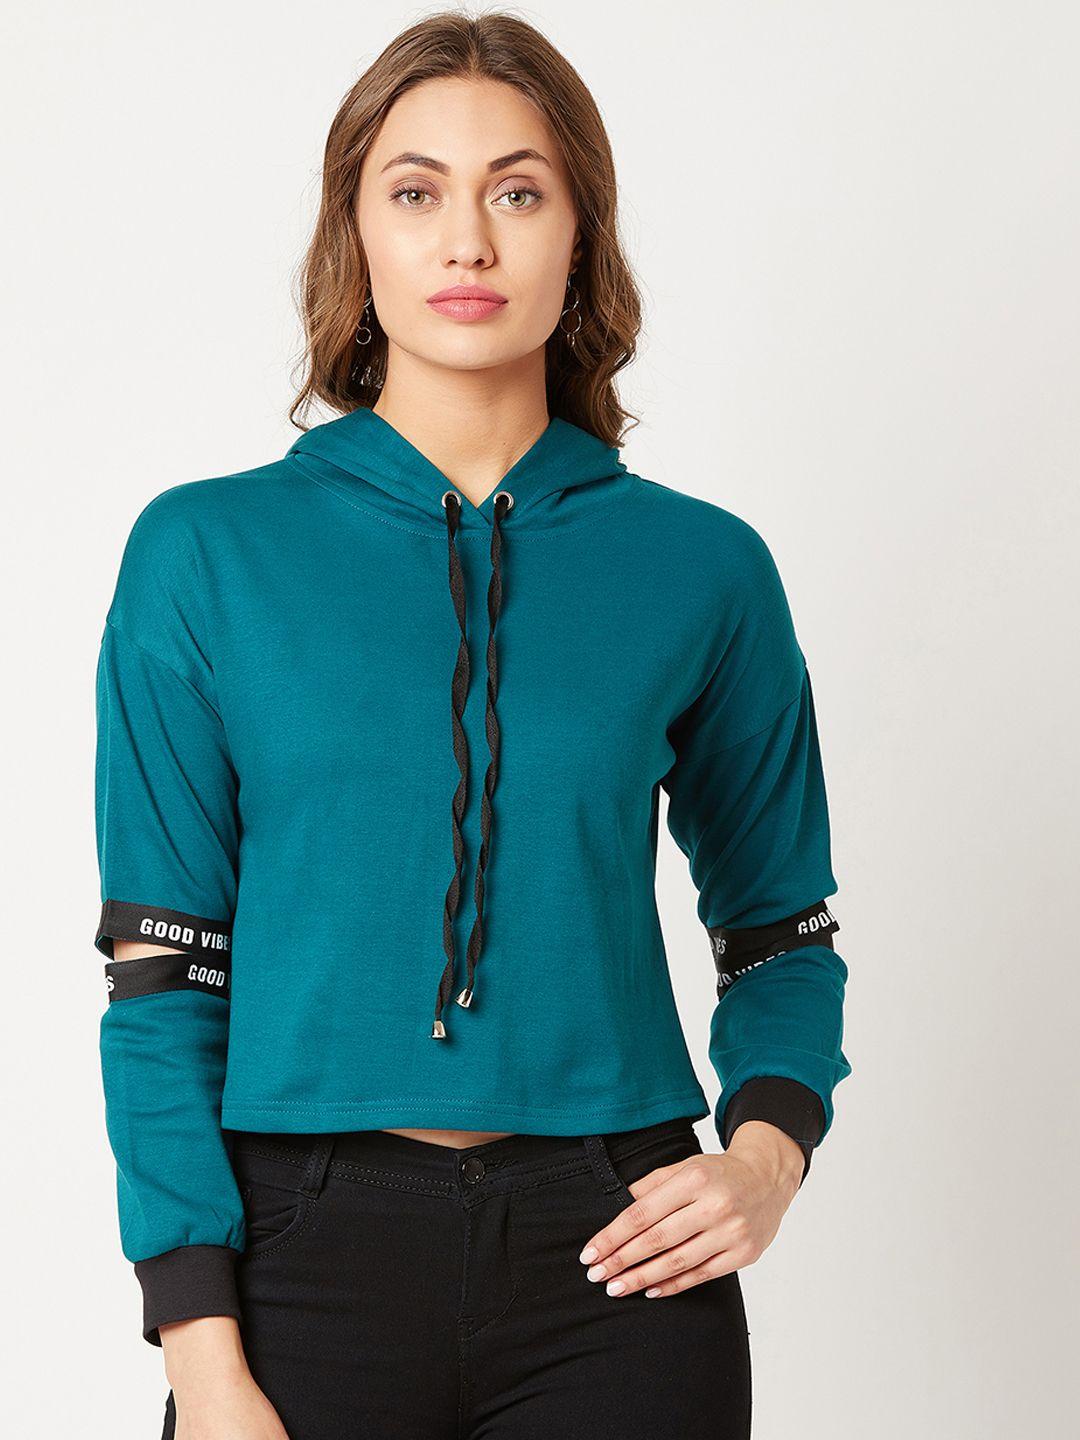 miss chase women turquoise blue solid hooded sweatshirt